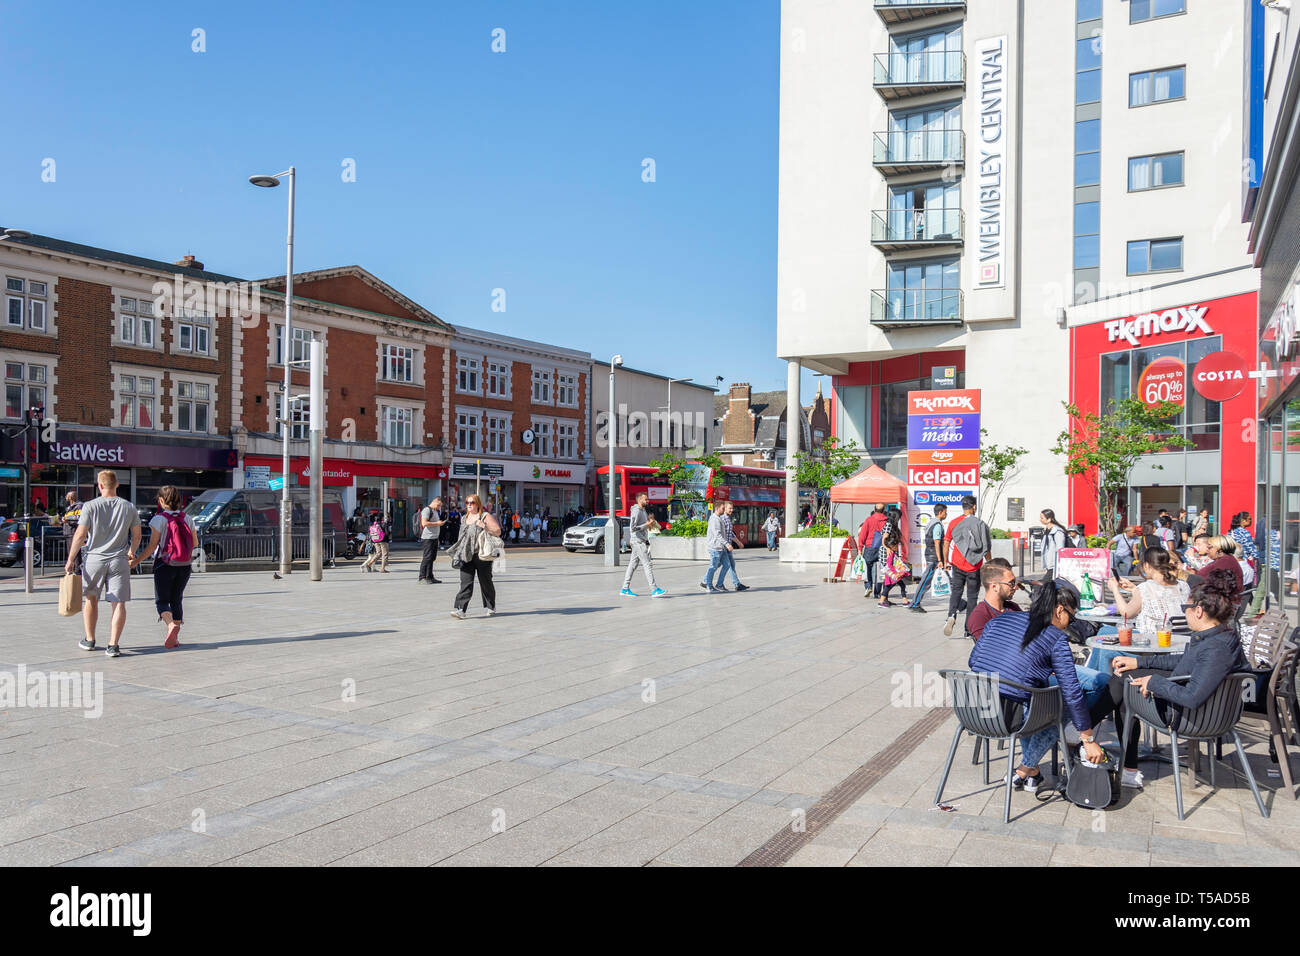 Wembley Central Square, High Road, Wembley, London Borough of Brent, Greater London, England, Regno Unito Foto Stock